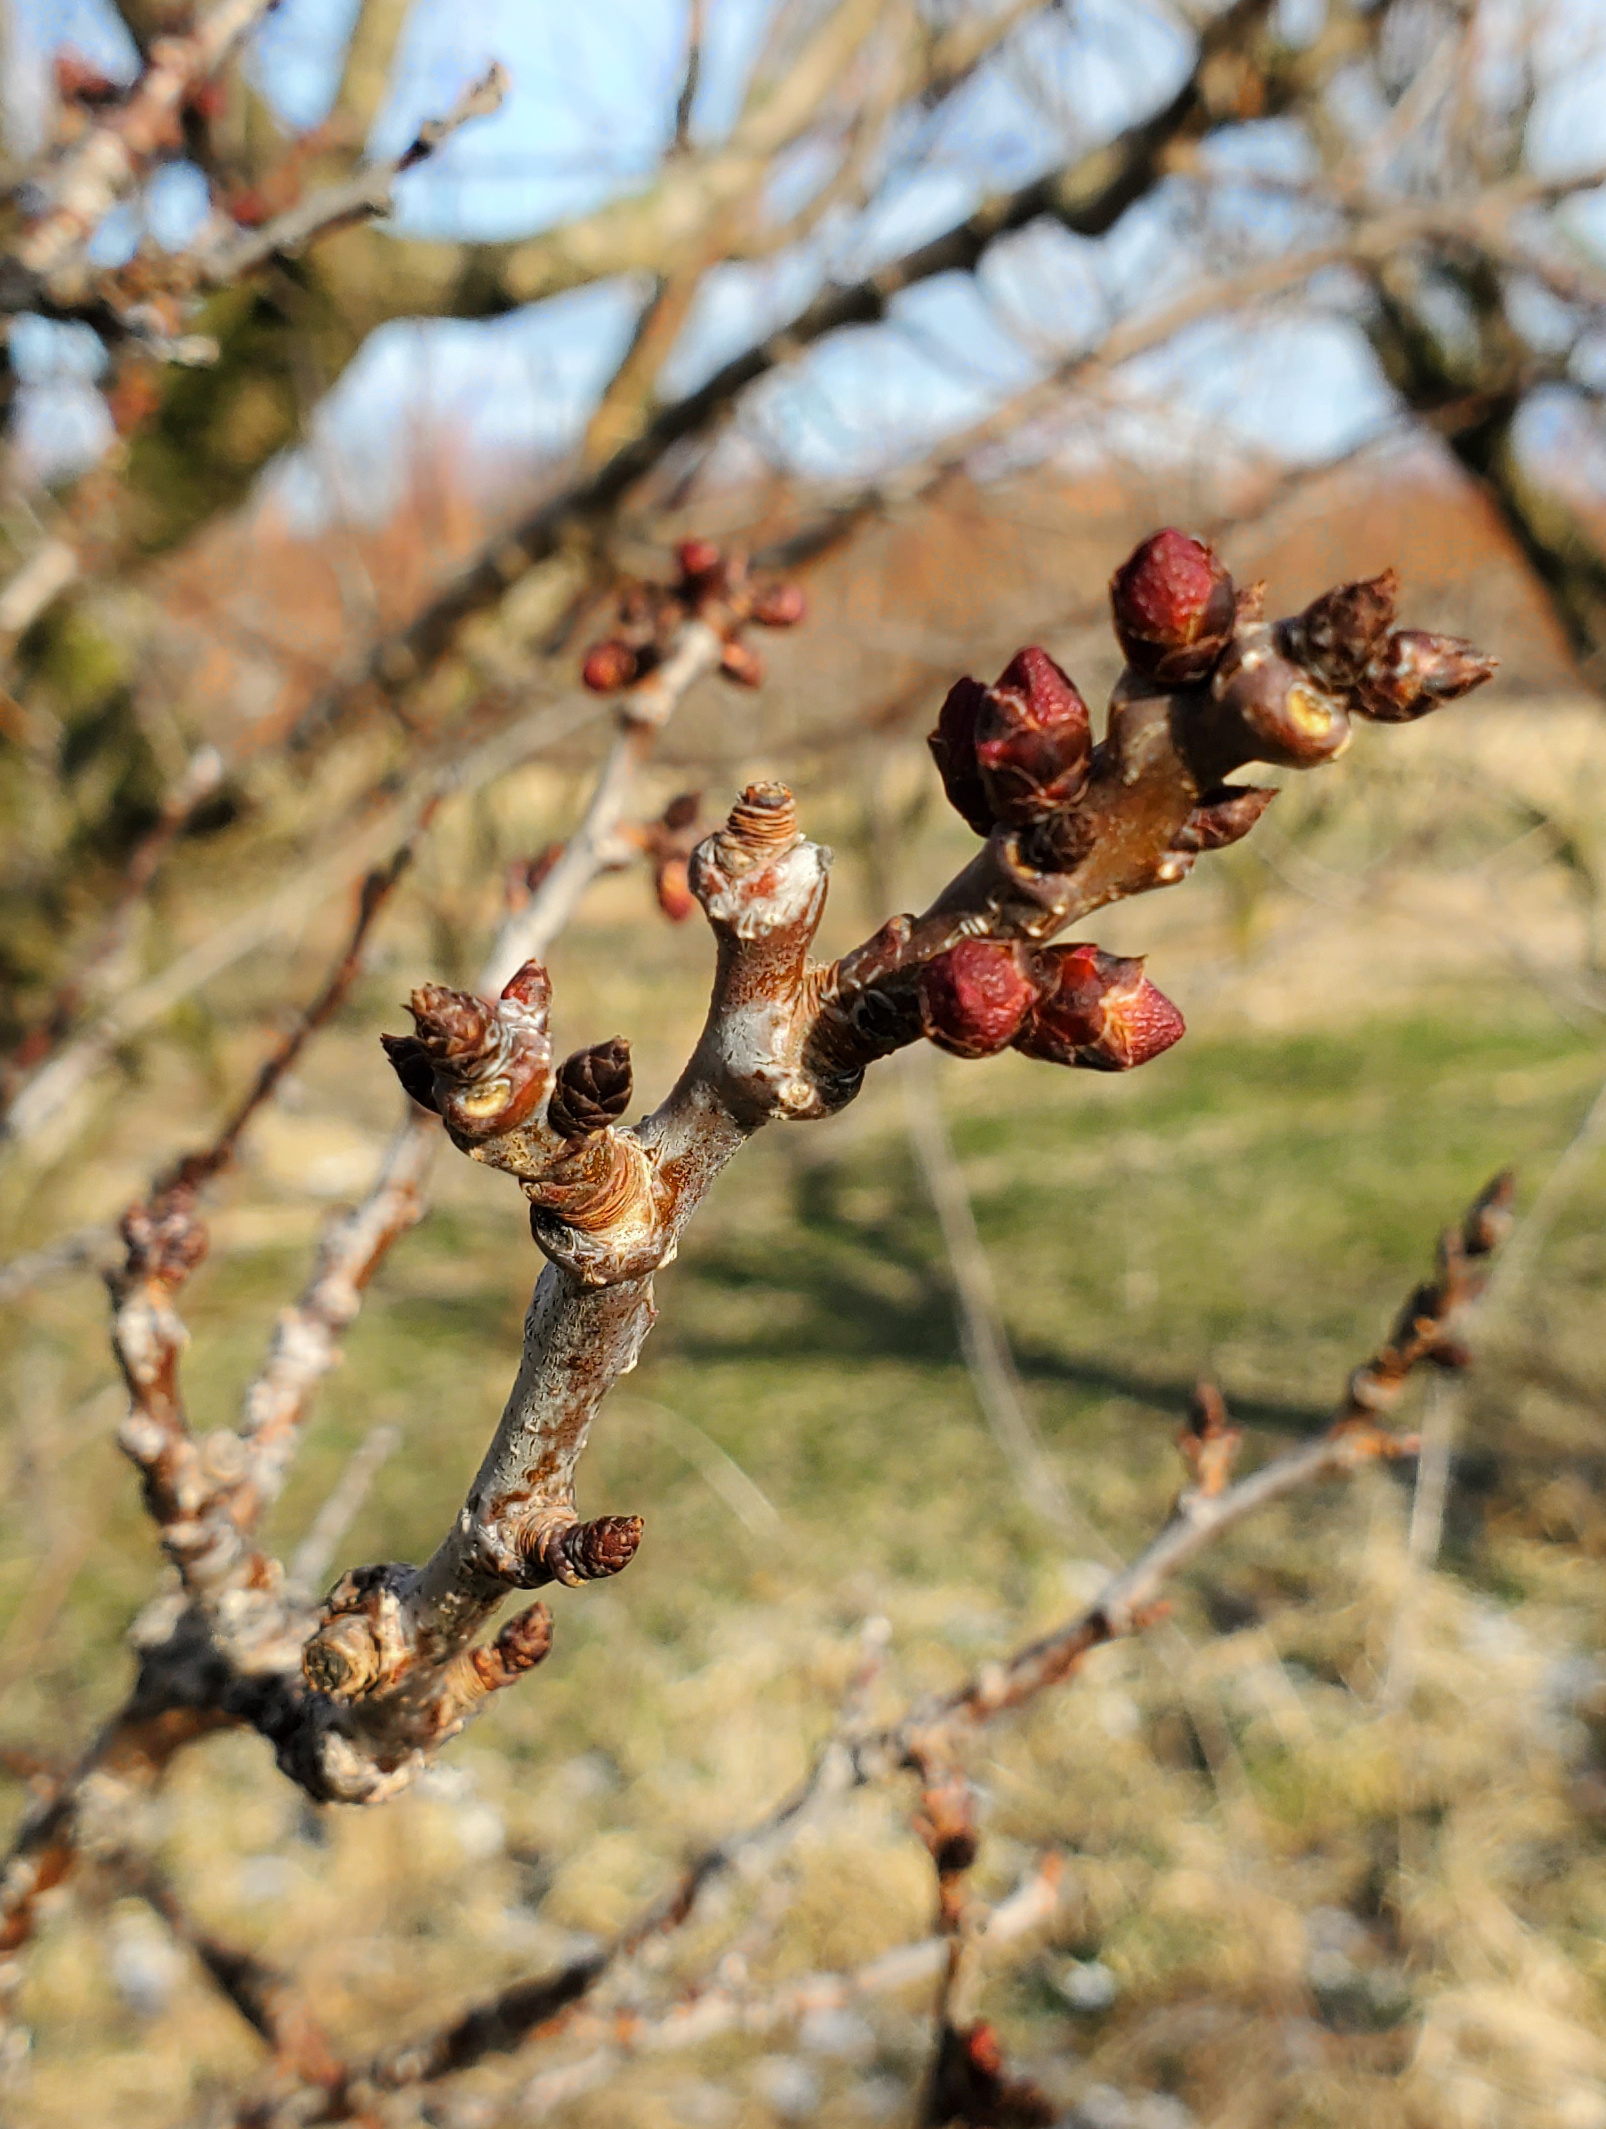 Buds swelling on an apricot plant.